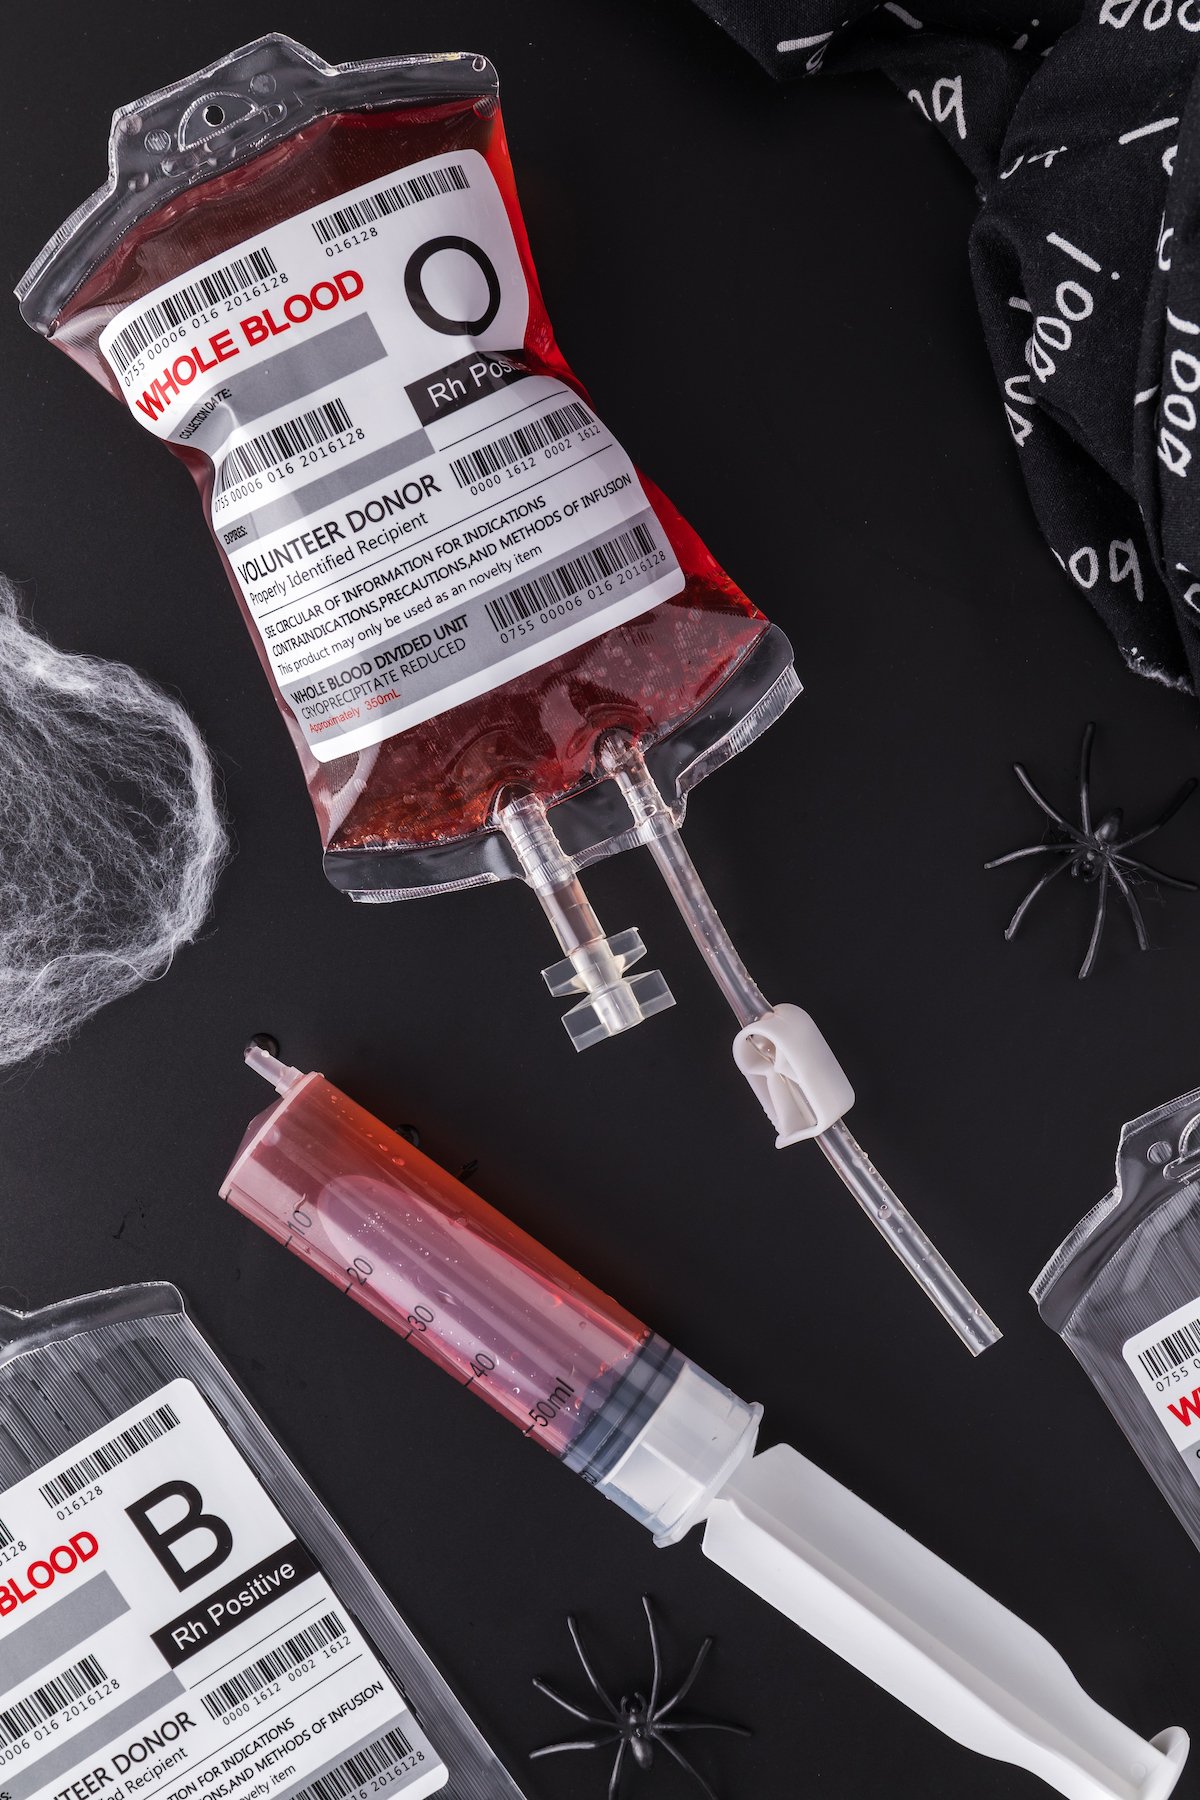 A fake "IV bag" has been filled with Halloween punch that looks like blood. A plastic syringe sits next to it.